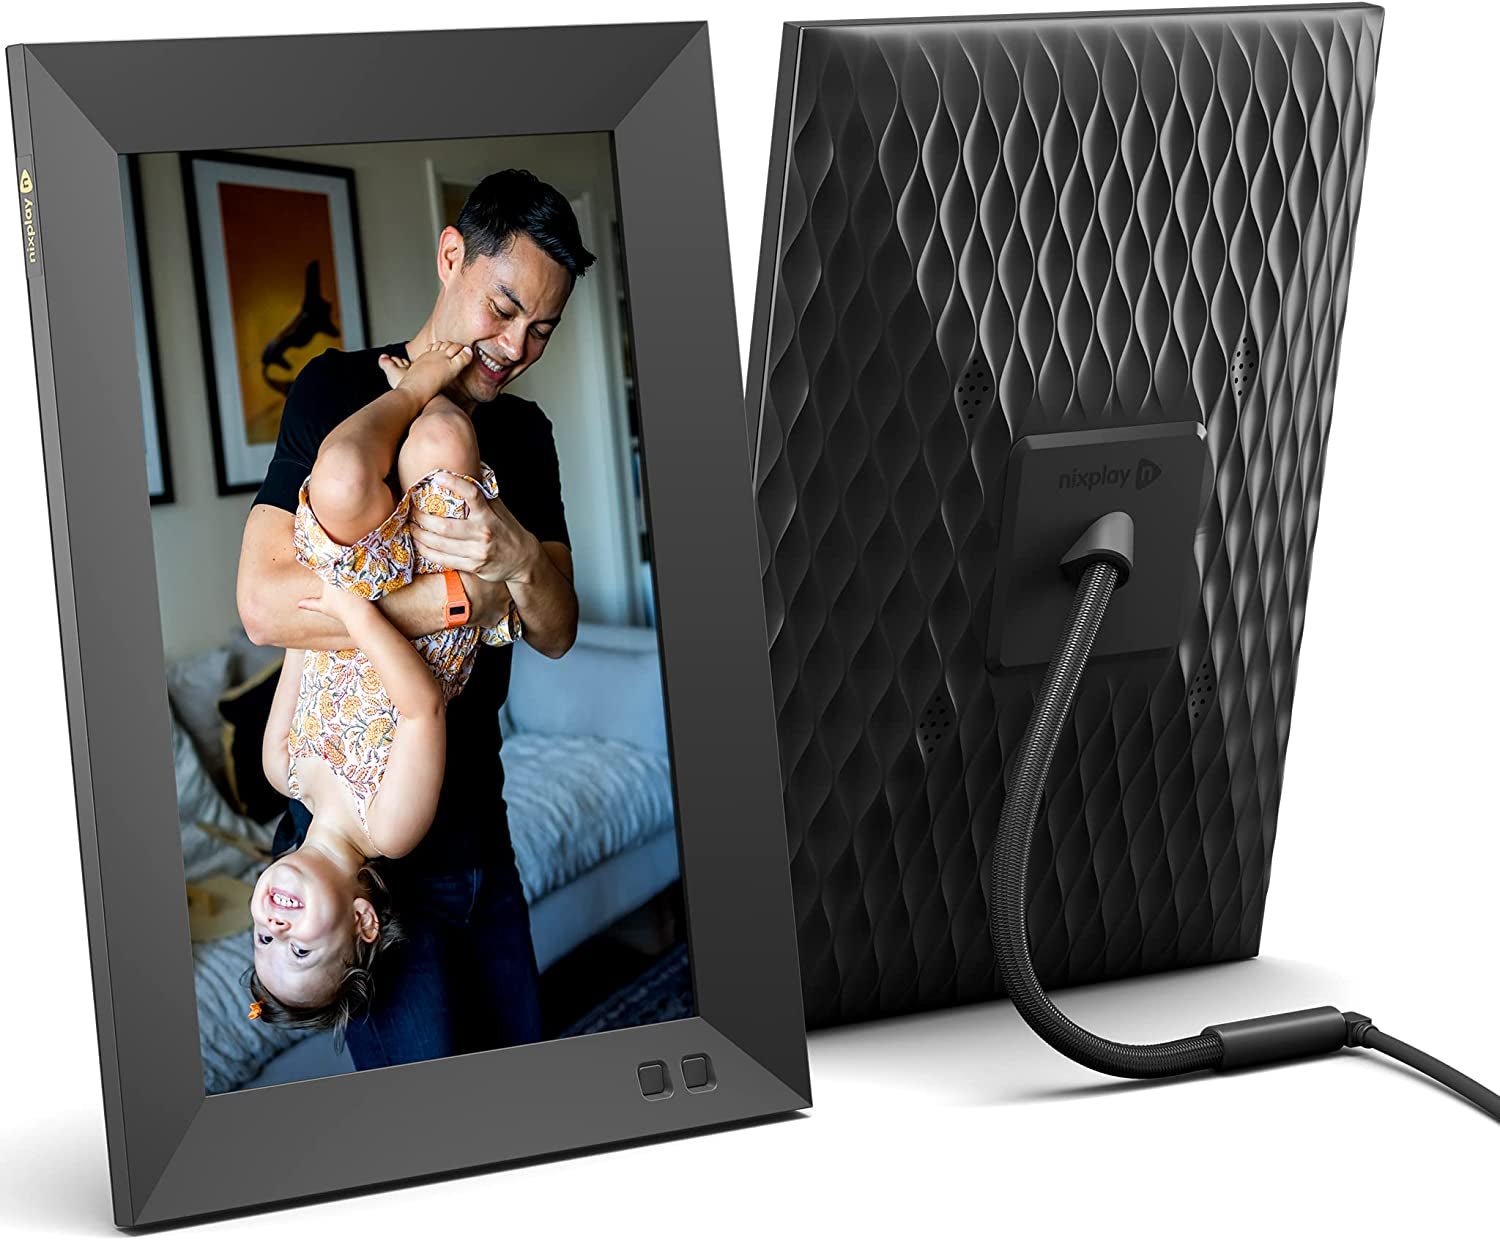 Long Distance High Tech Gifts For Mom on Mother's Day! - Classic Hits 94.7